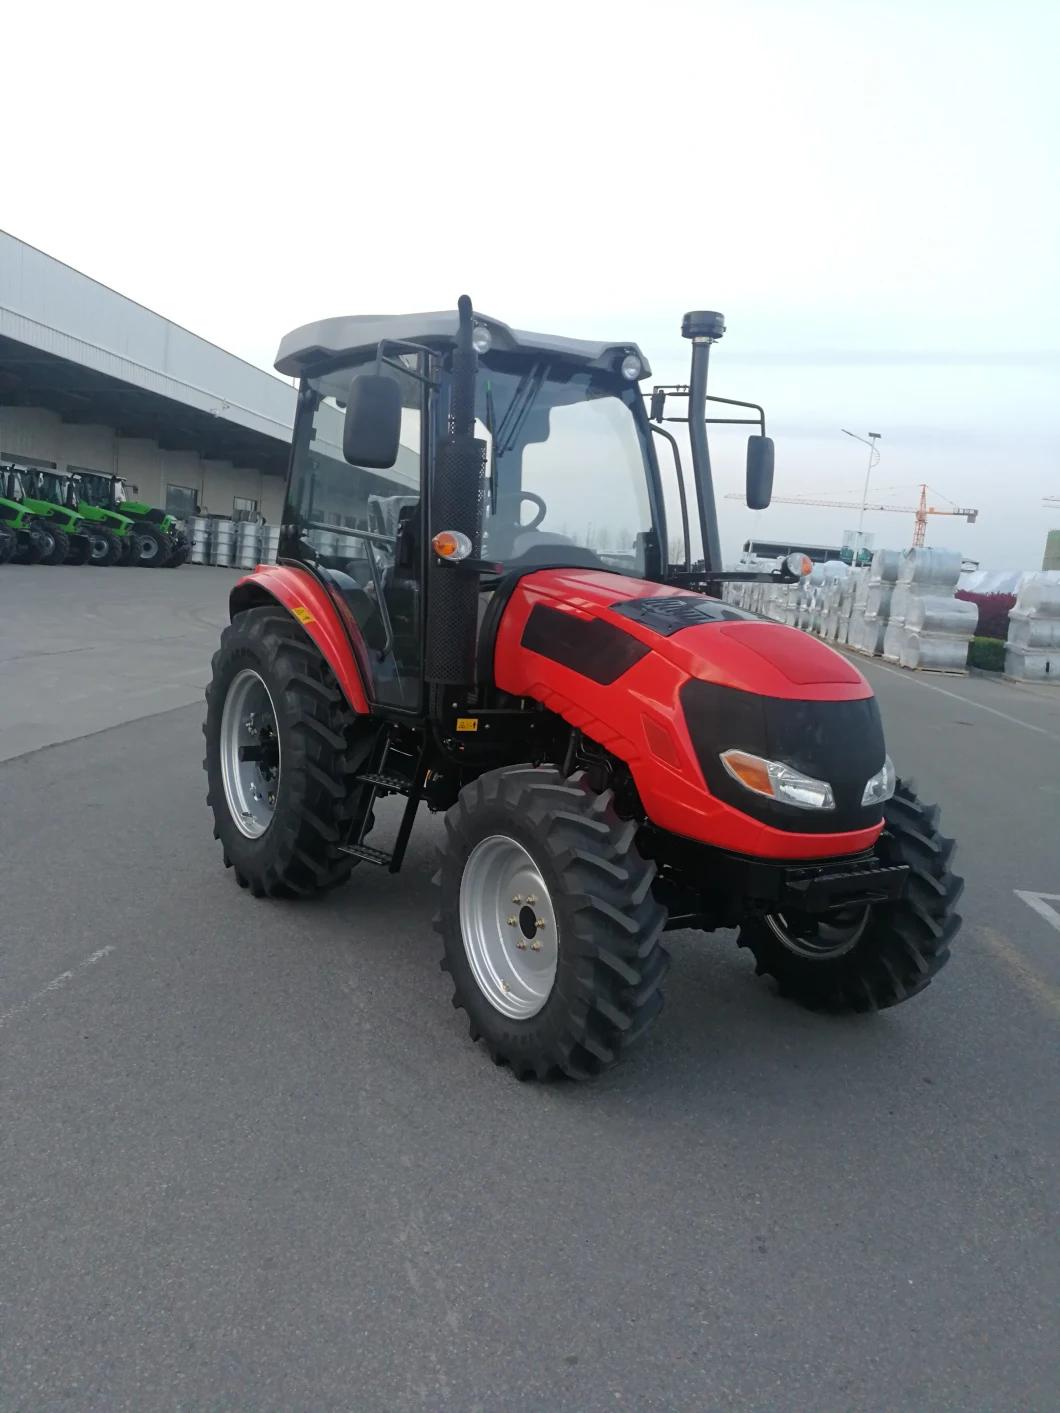 Dongfeng Brand Truck Supplier Manufacture Farmlead Brand Agricultural Tractors